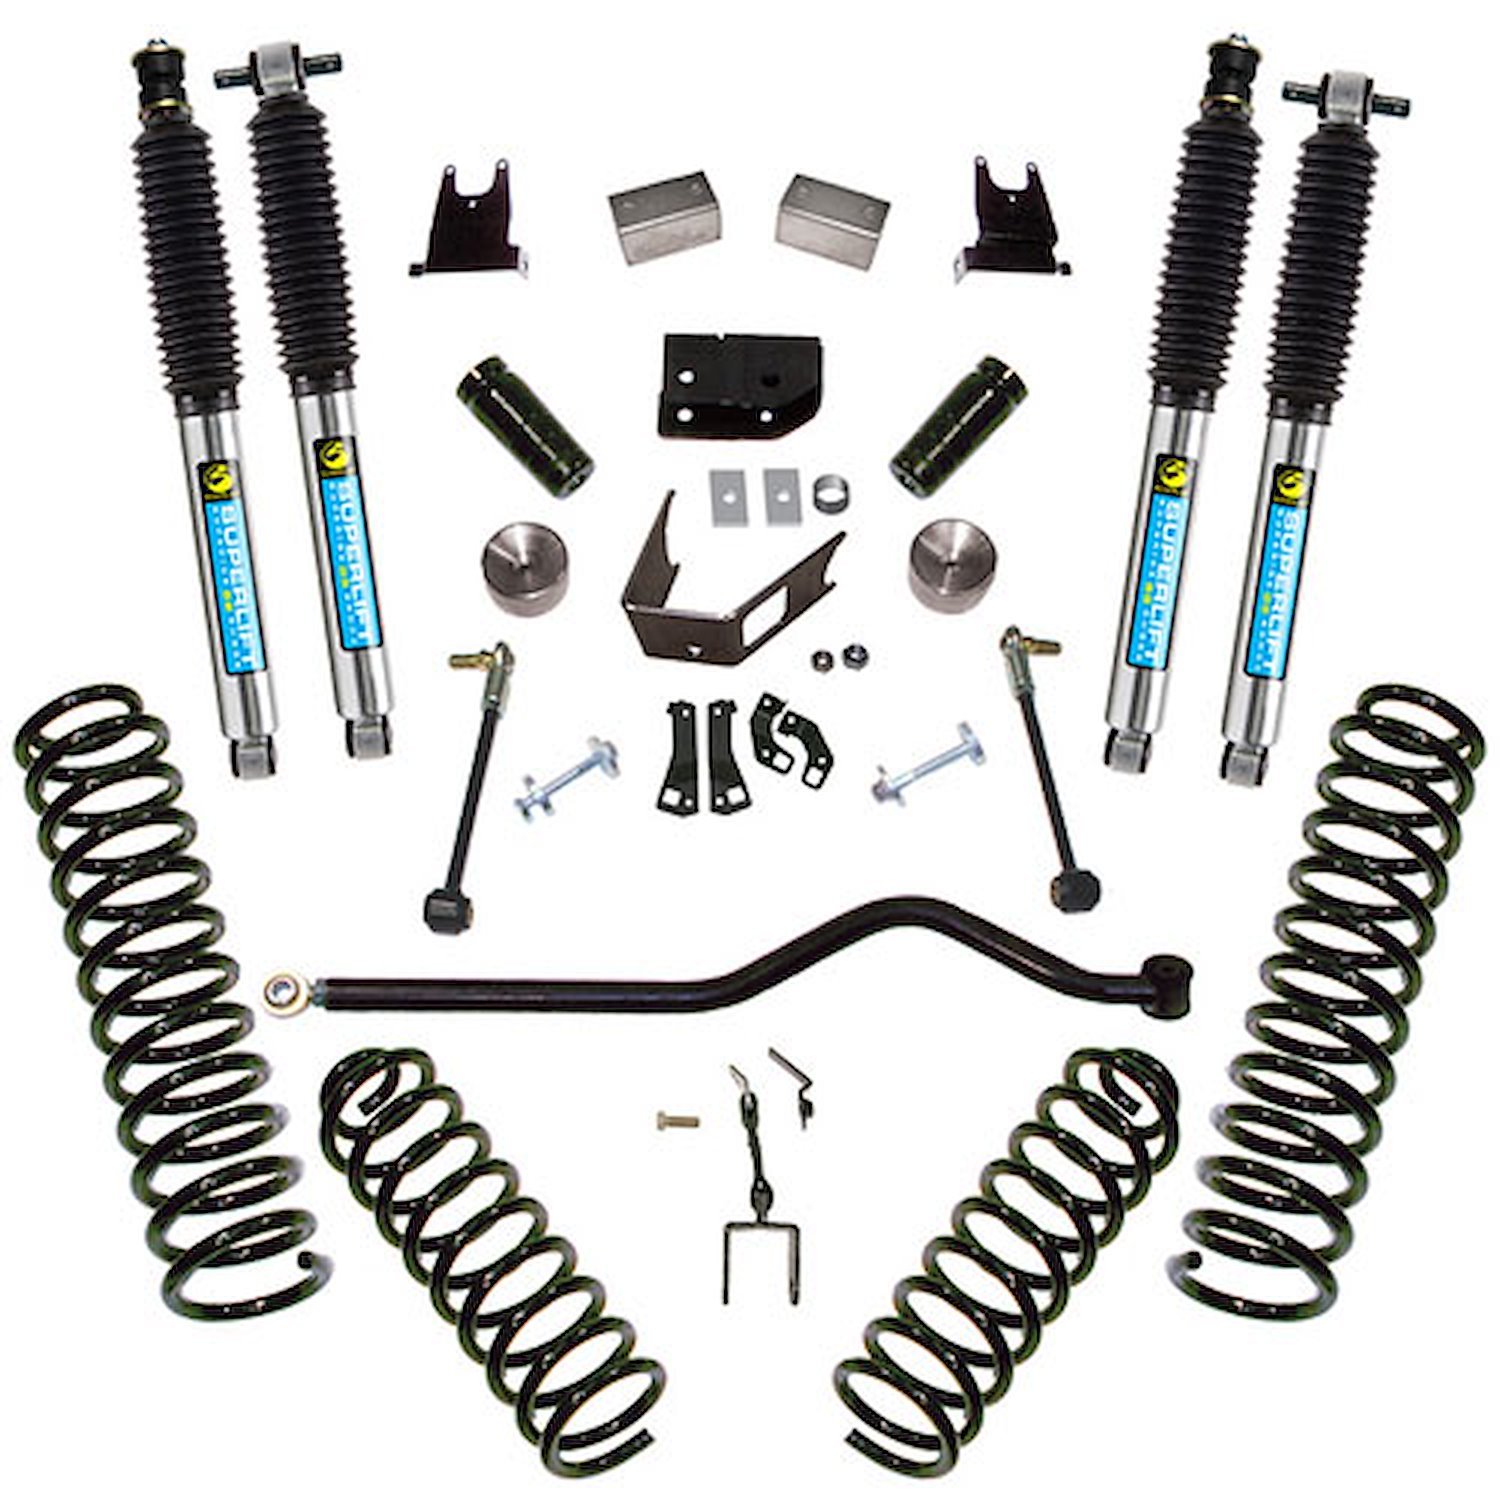 K928B Front and Rear Suspension Lift Kit, Lift